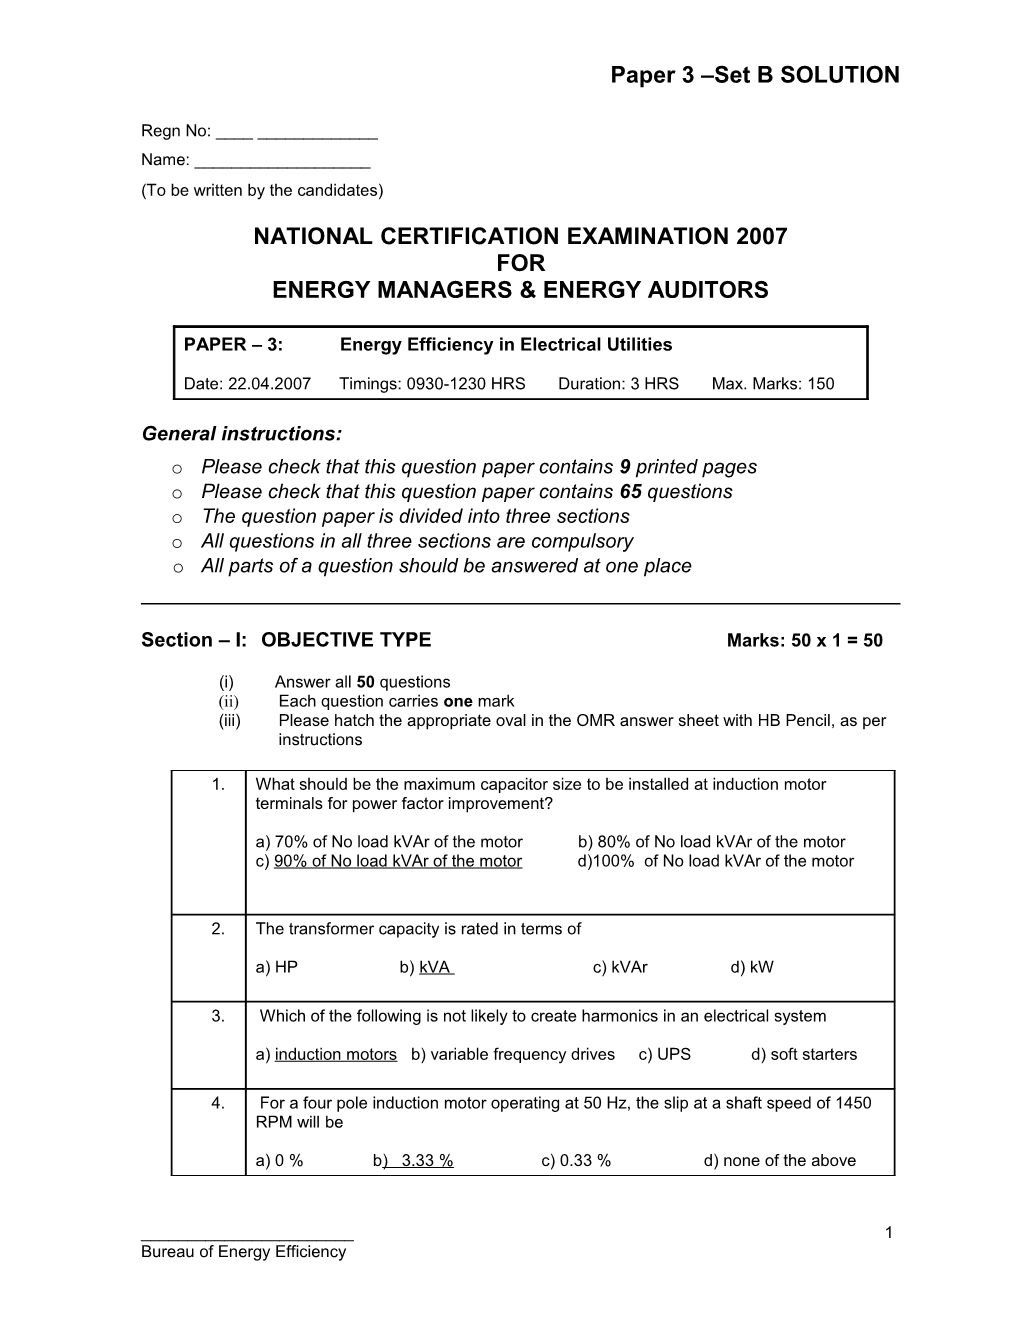 National Certification Examination 2004 s1